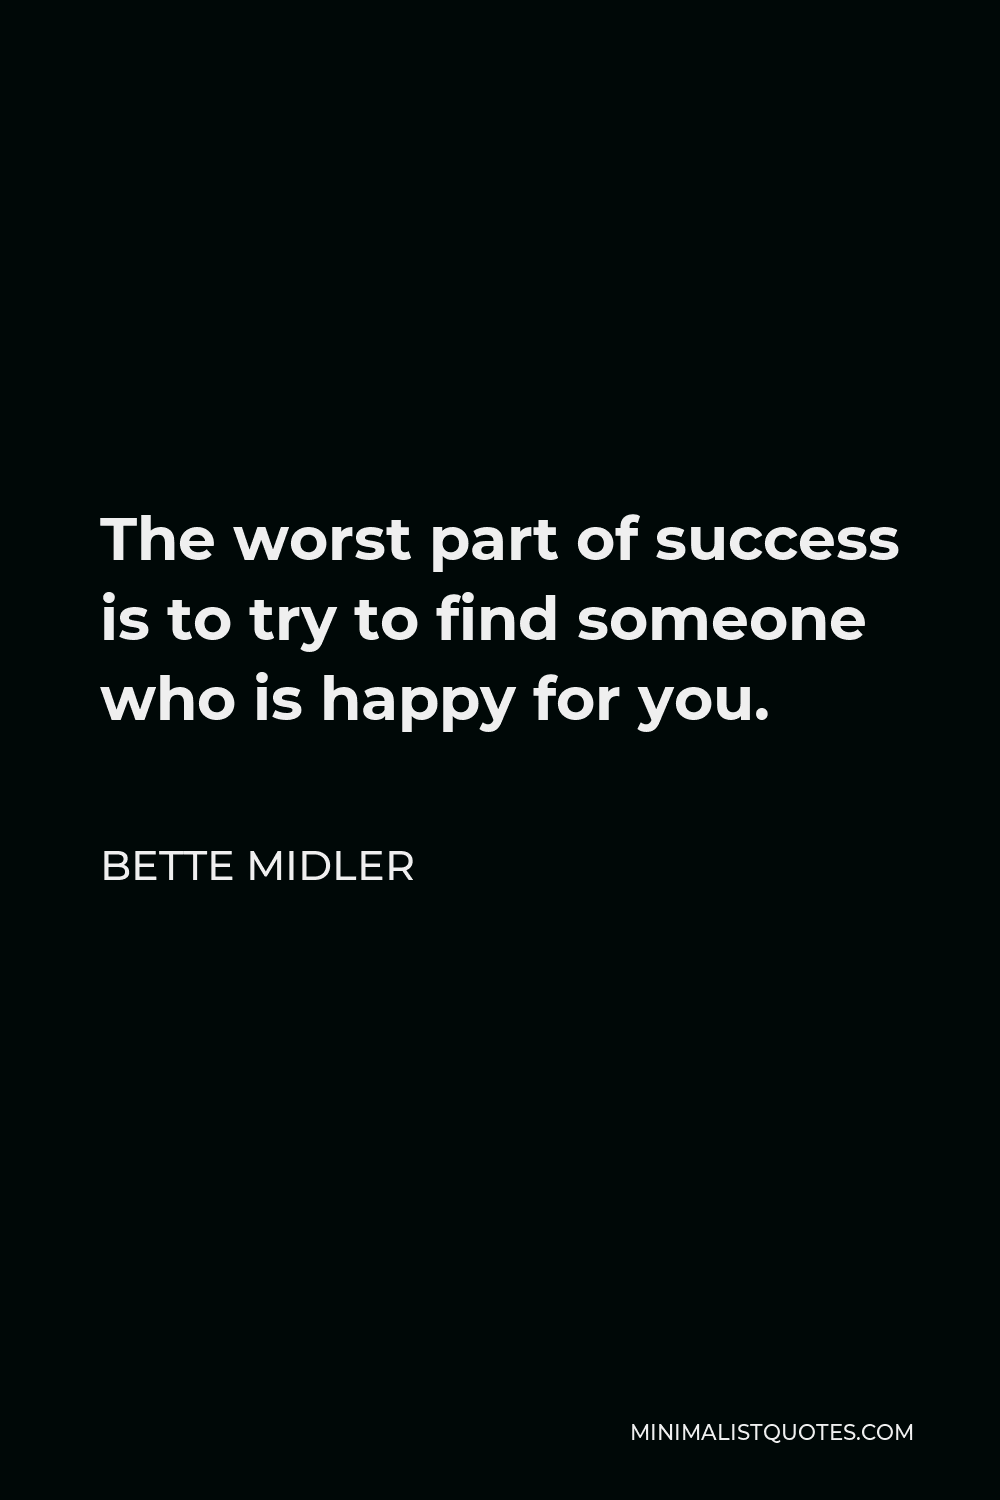 Bette Midler Quote - The worst part of success is to try to find someone who is happy for you.